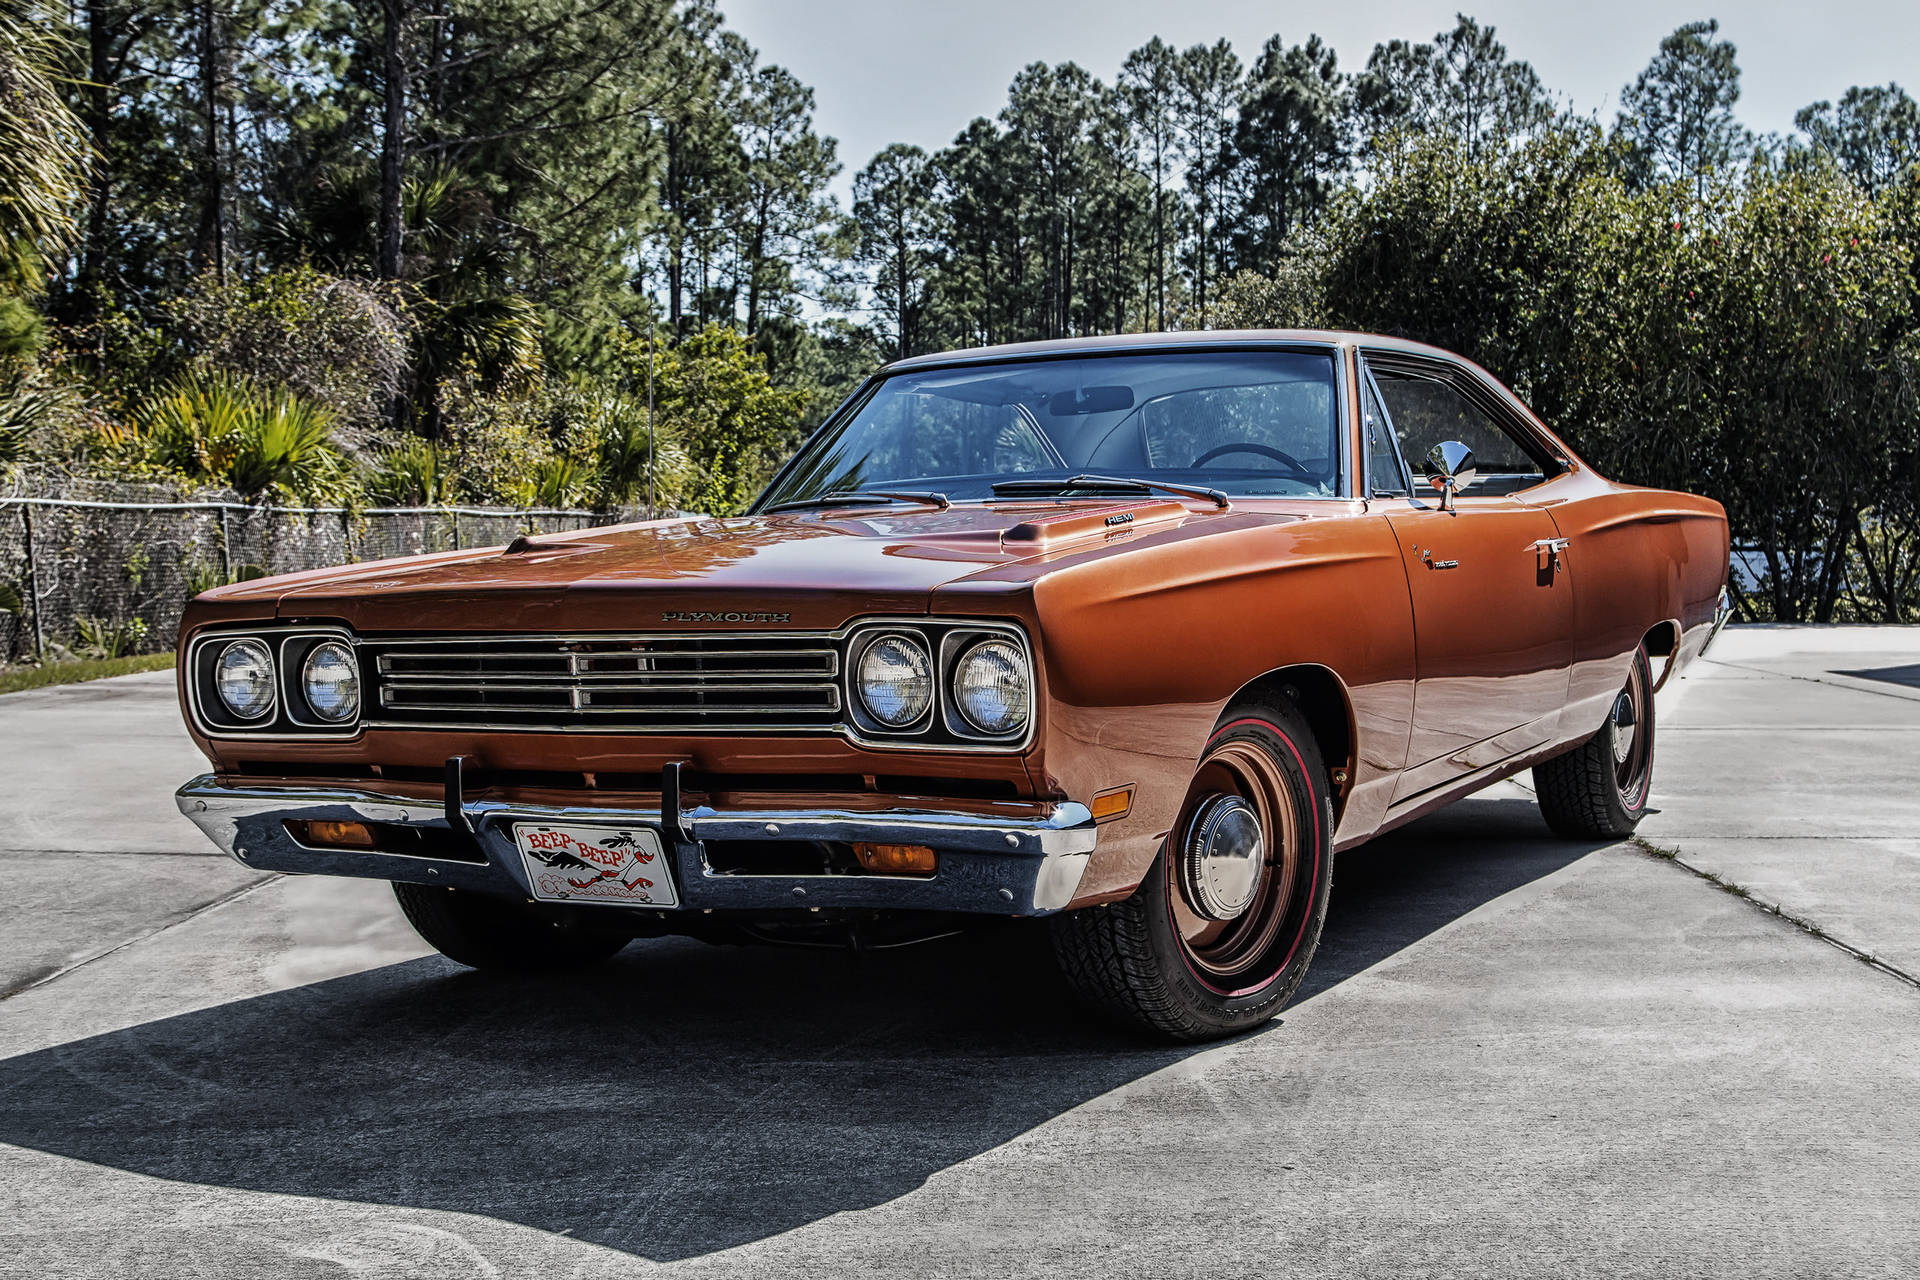 Caption: "Classic 1969 Plymouth Road Runner in a Striking Brown Color" Wallpaper